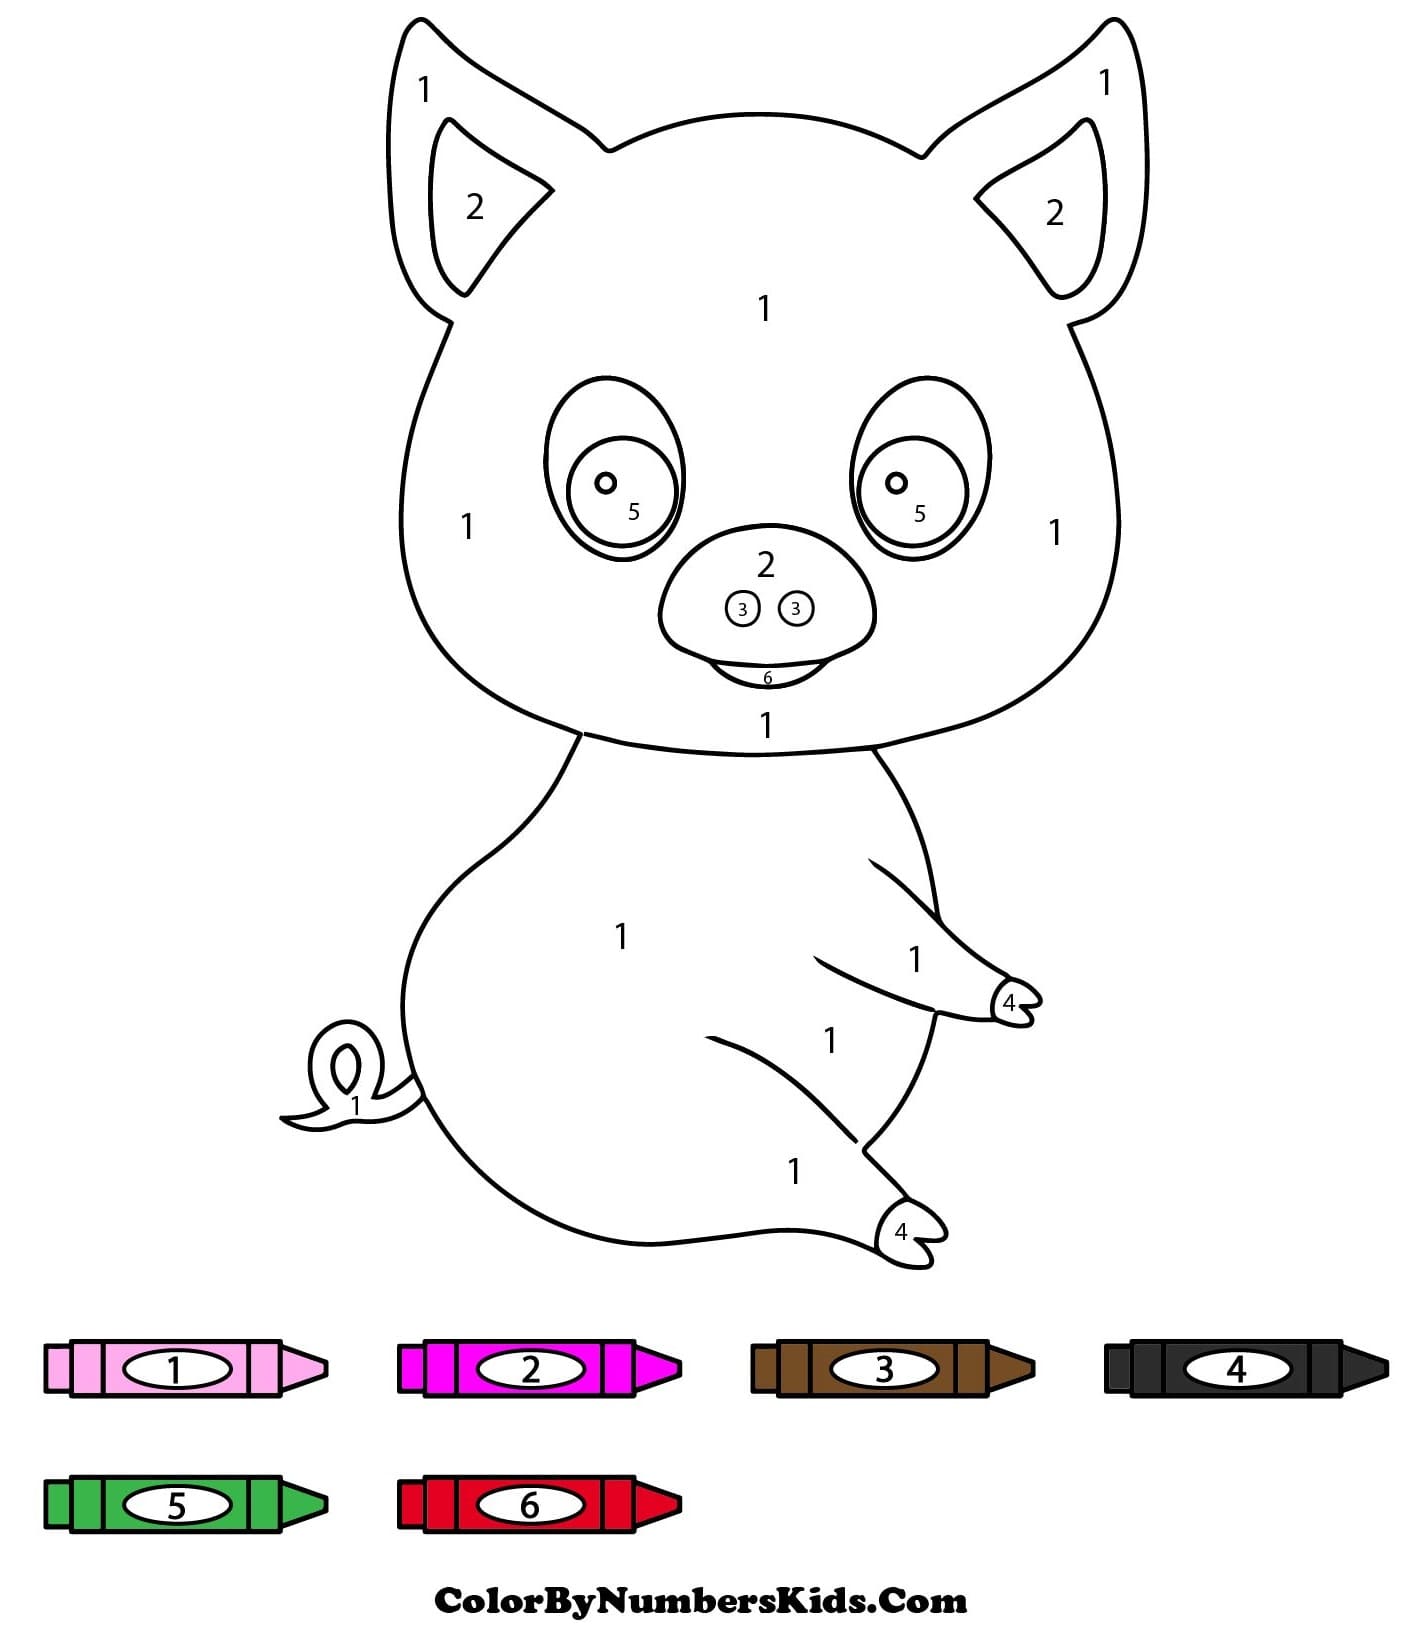 A Pig Color By Number